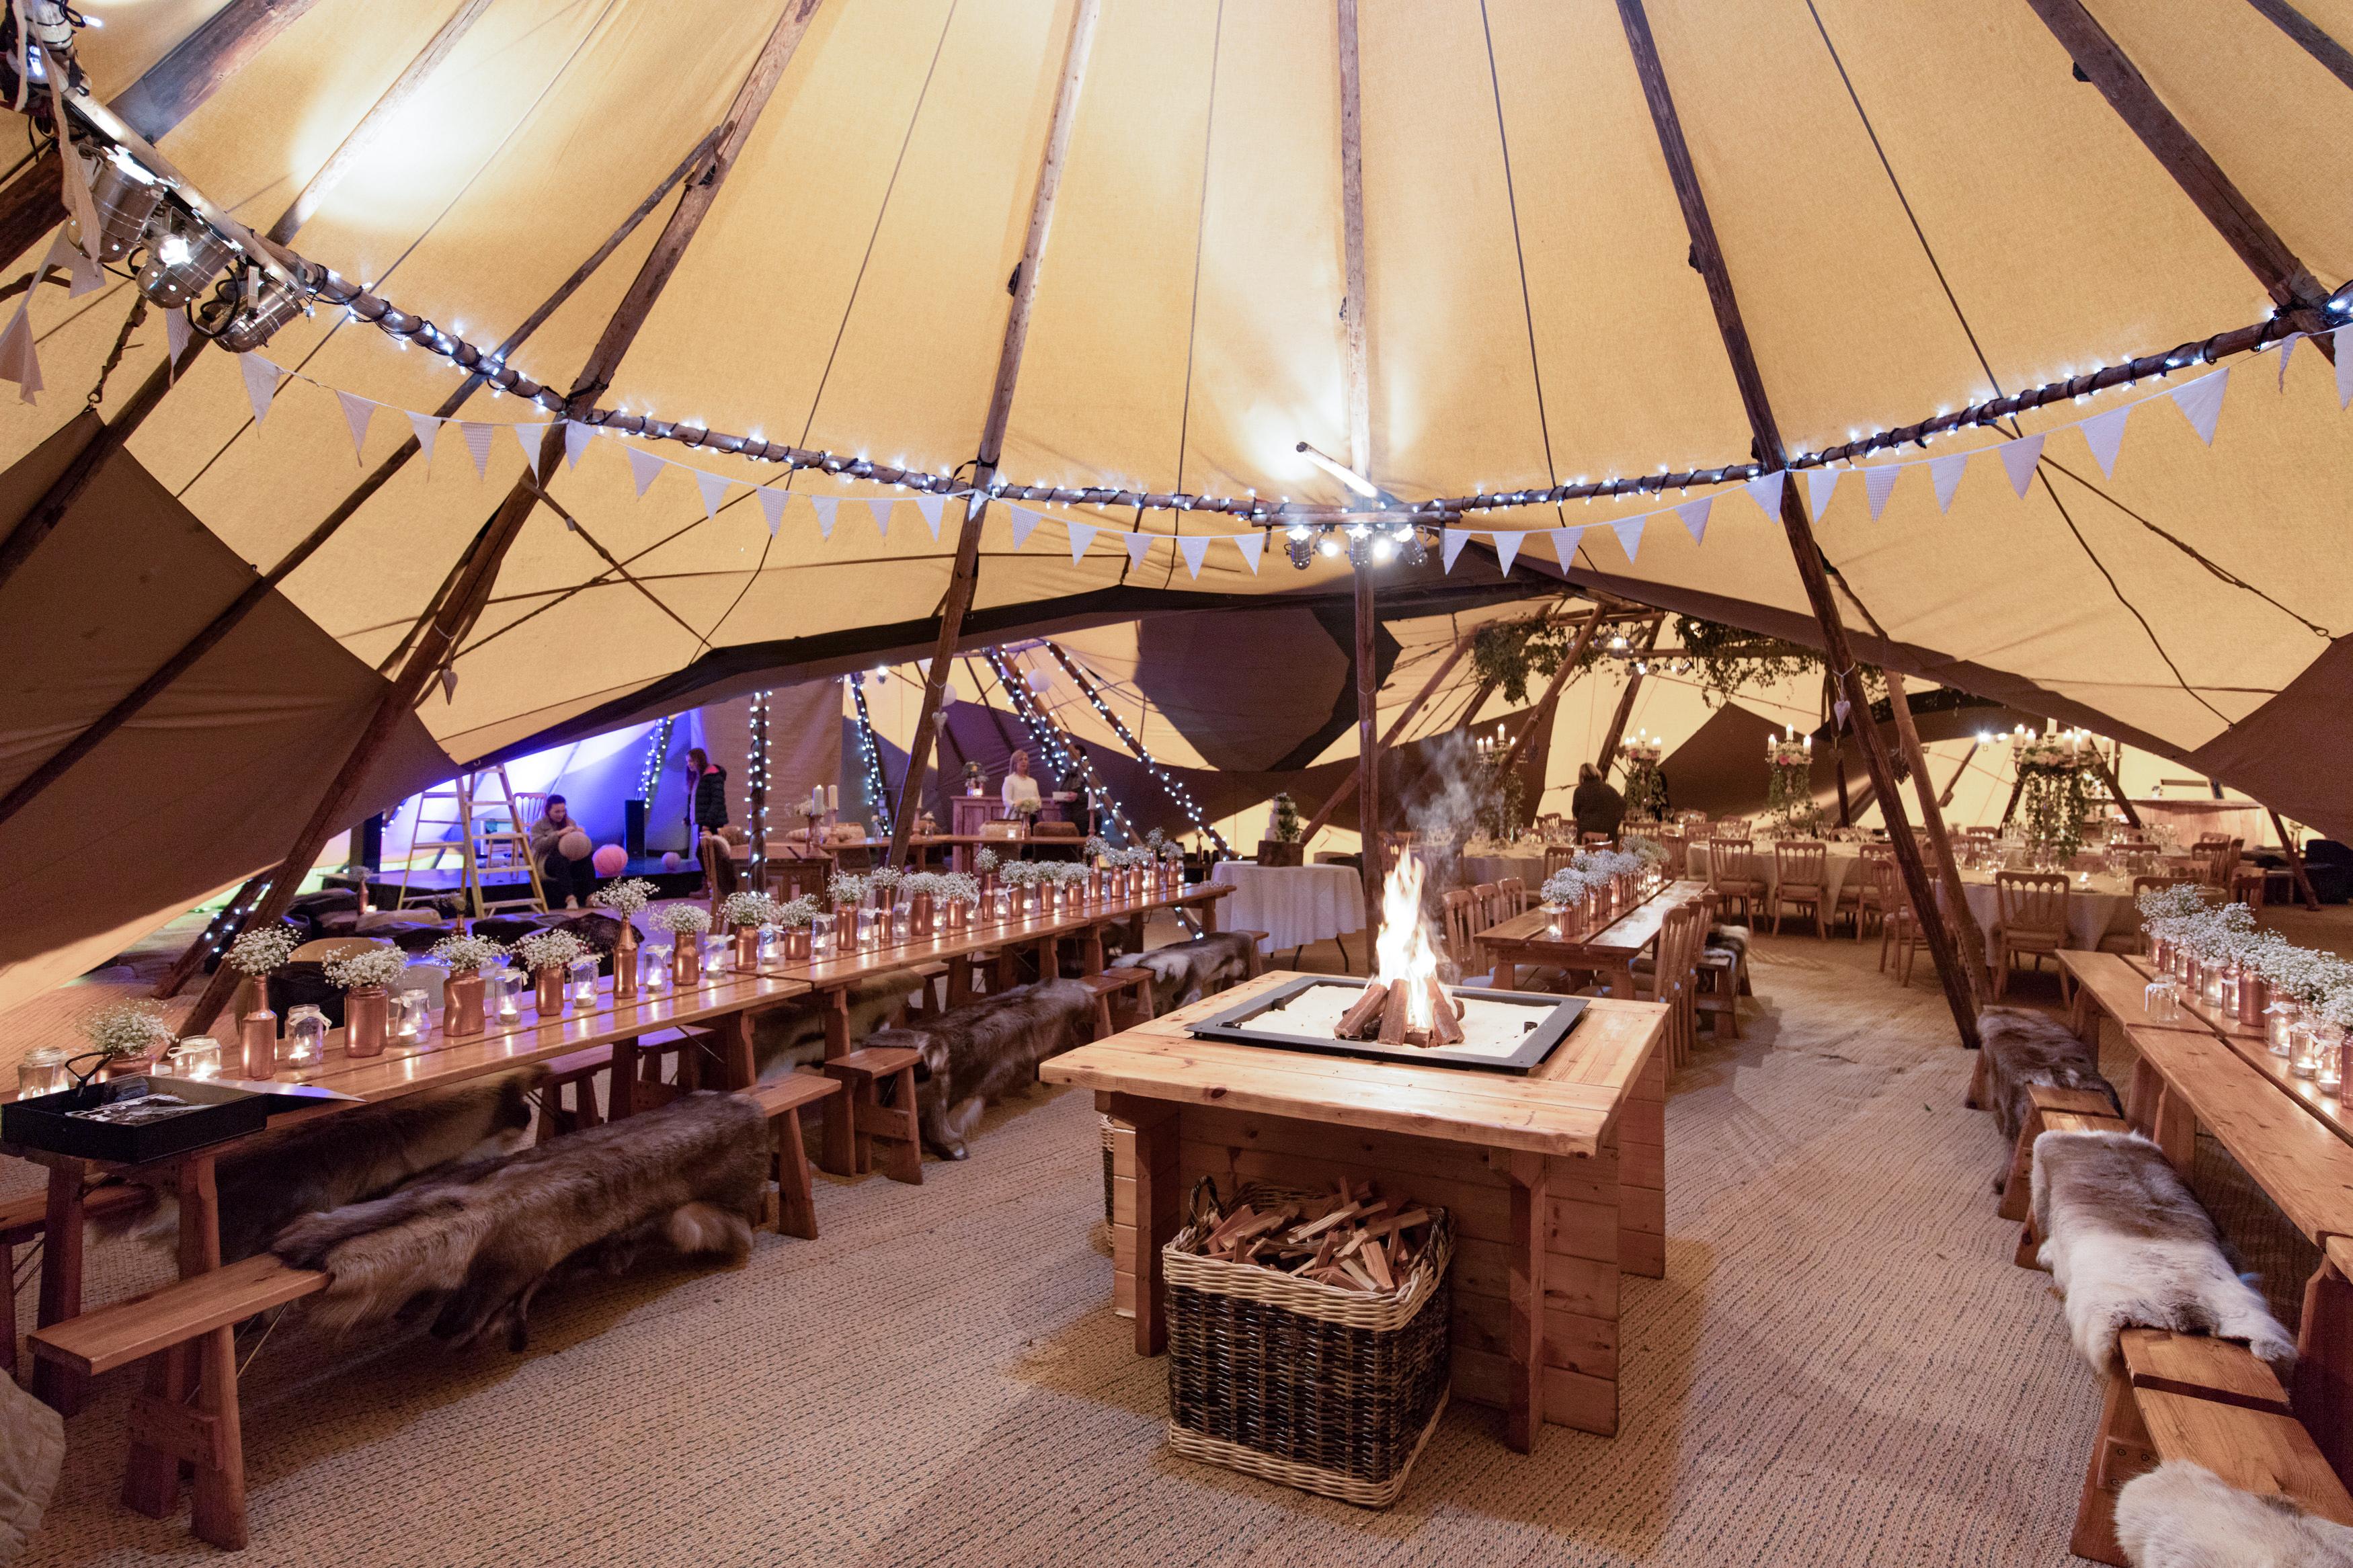 TABLES BENCHES Beautiful World Tents Chris Giles Photography Large Fire